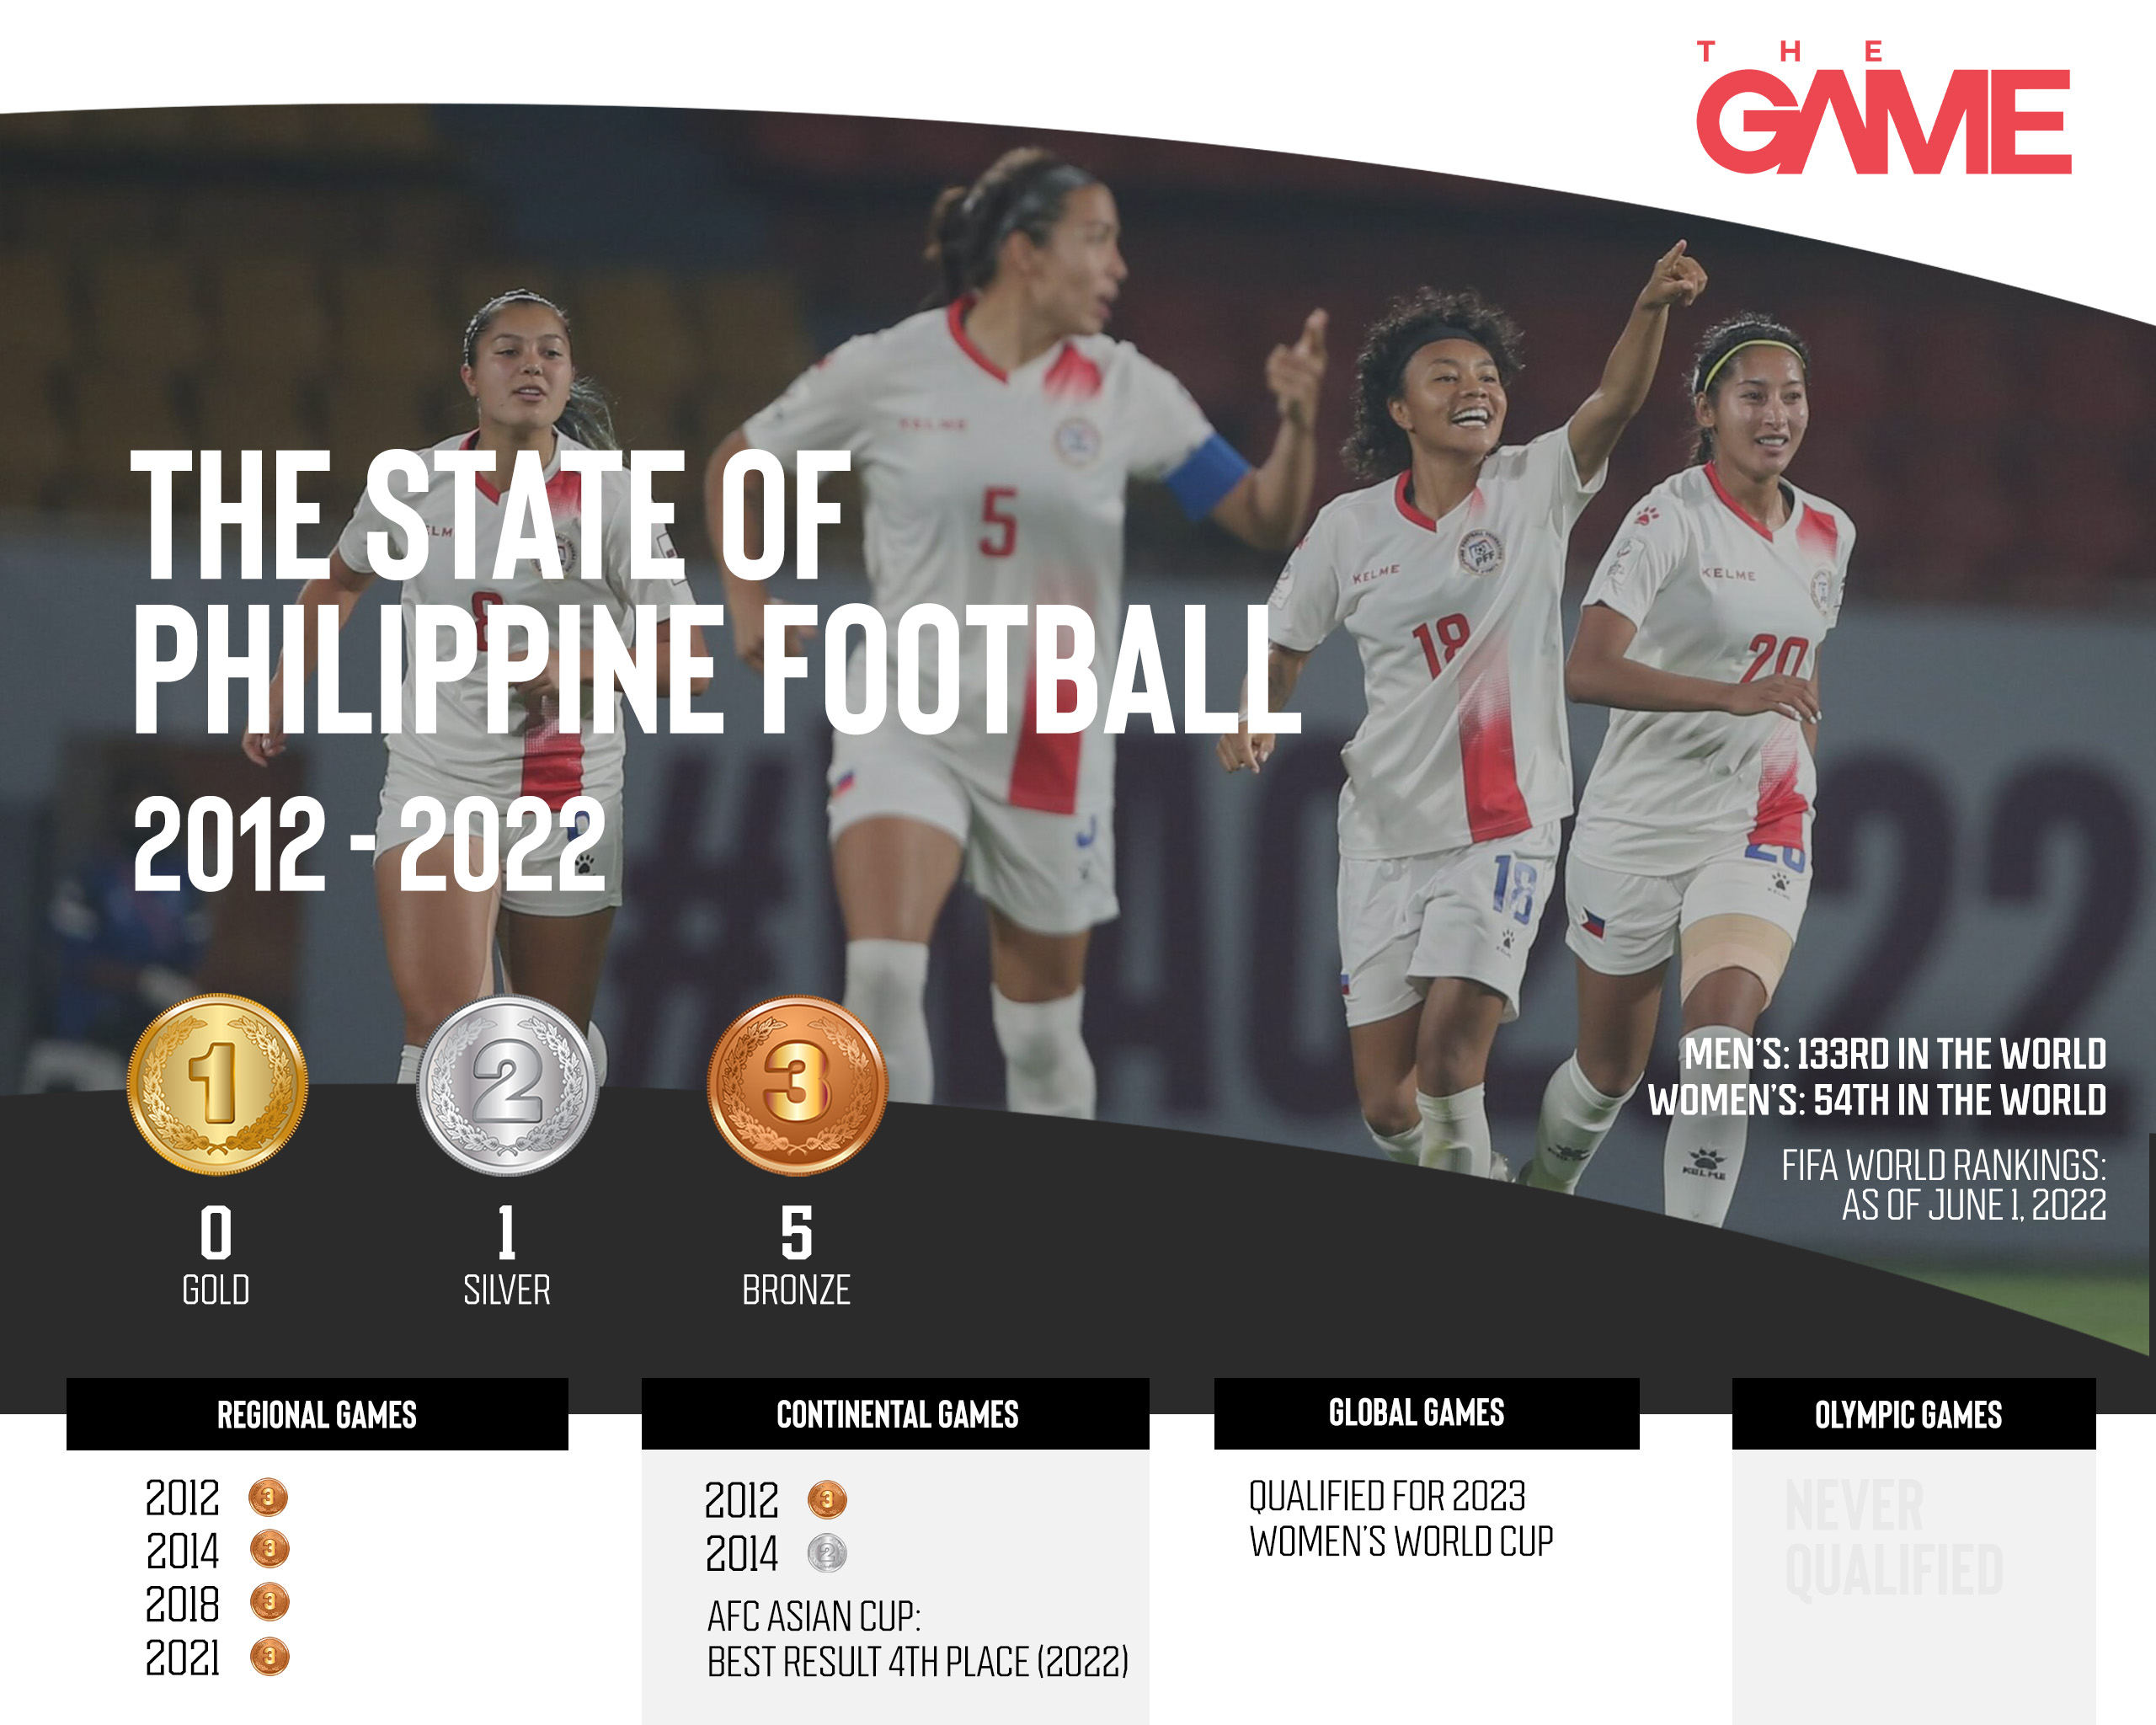 The Philippines' medals for football from 2012 to 2022.